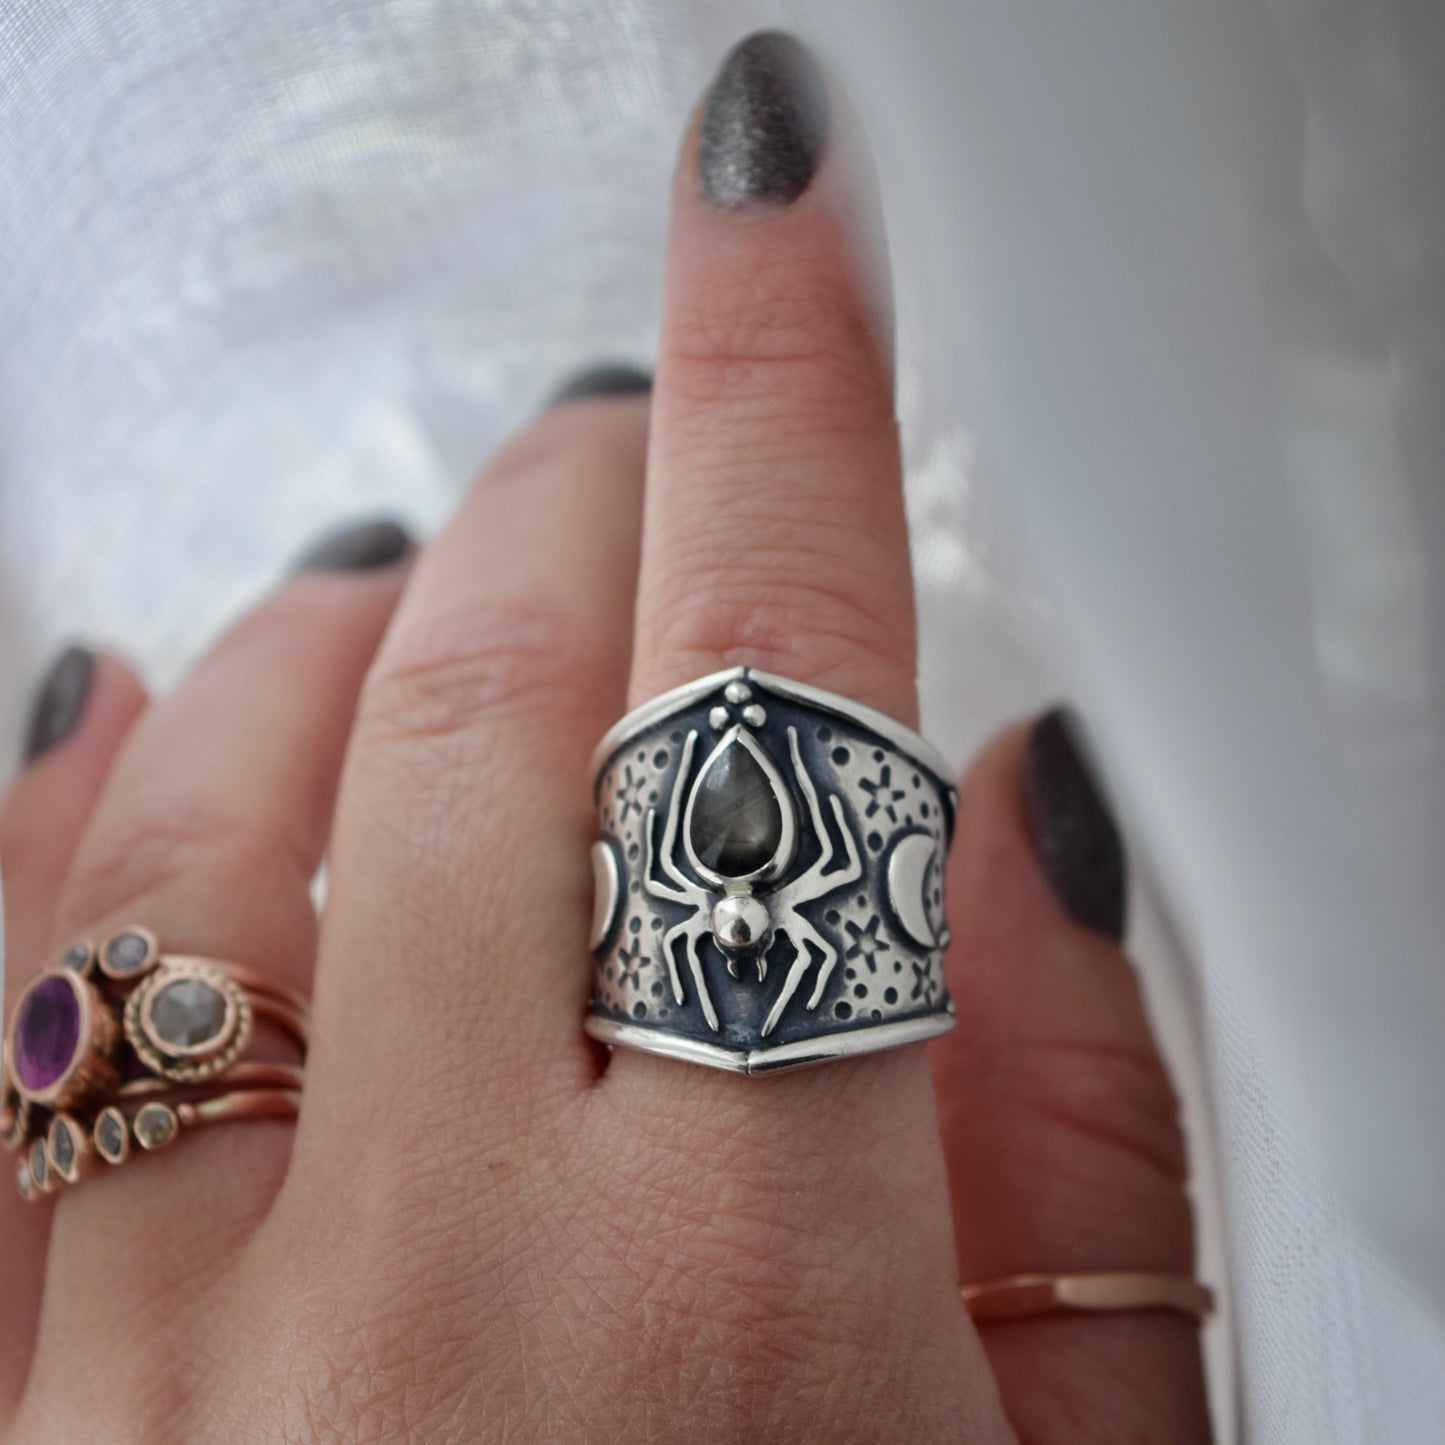 Lady Arachnid Shield Ring with Sapphire Size 8.5/8.75